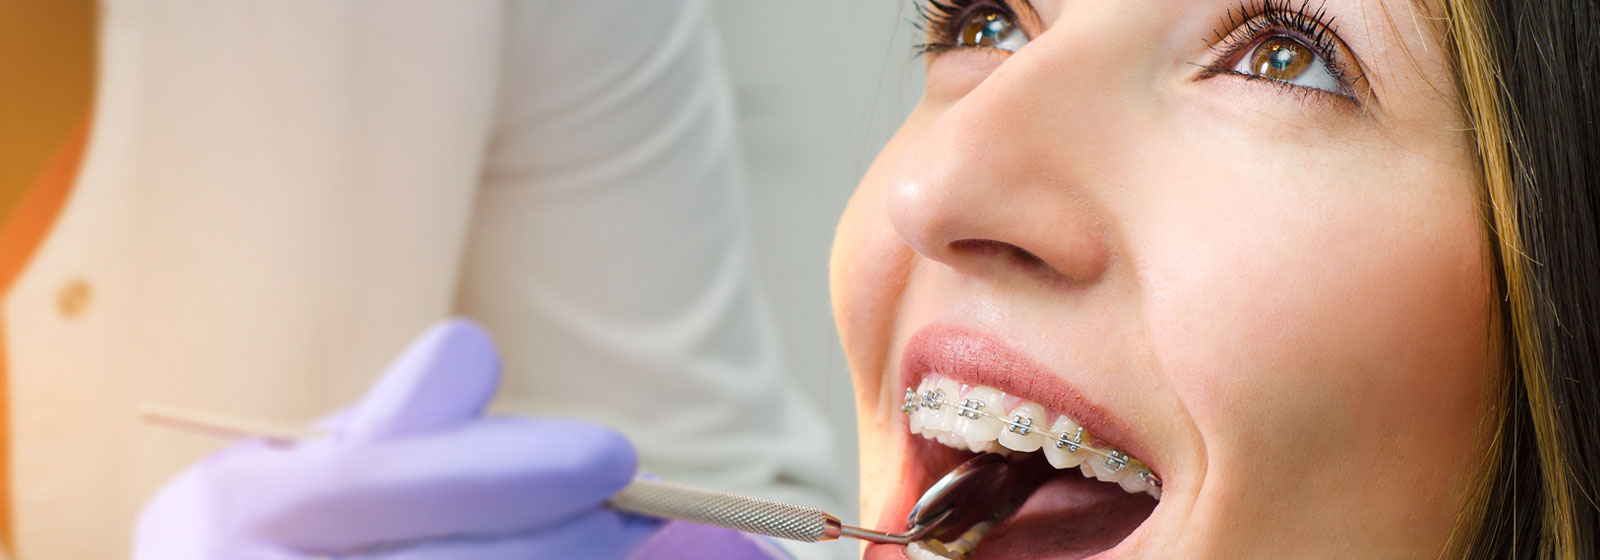 A Dentist checking orthodontic braces